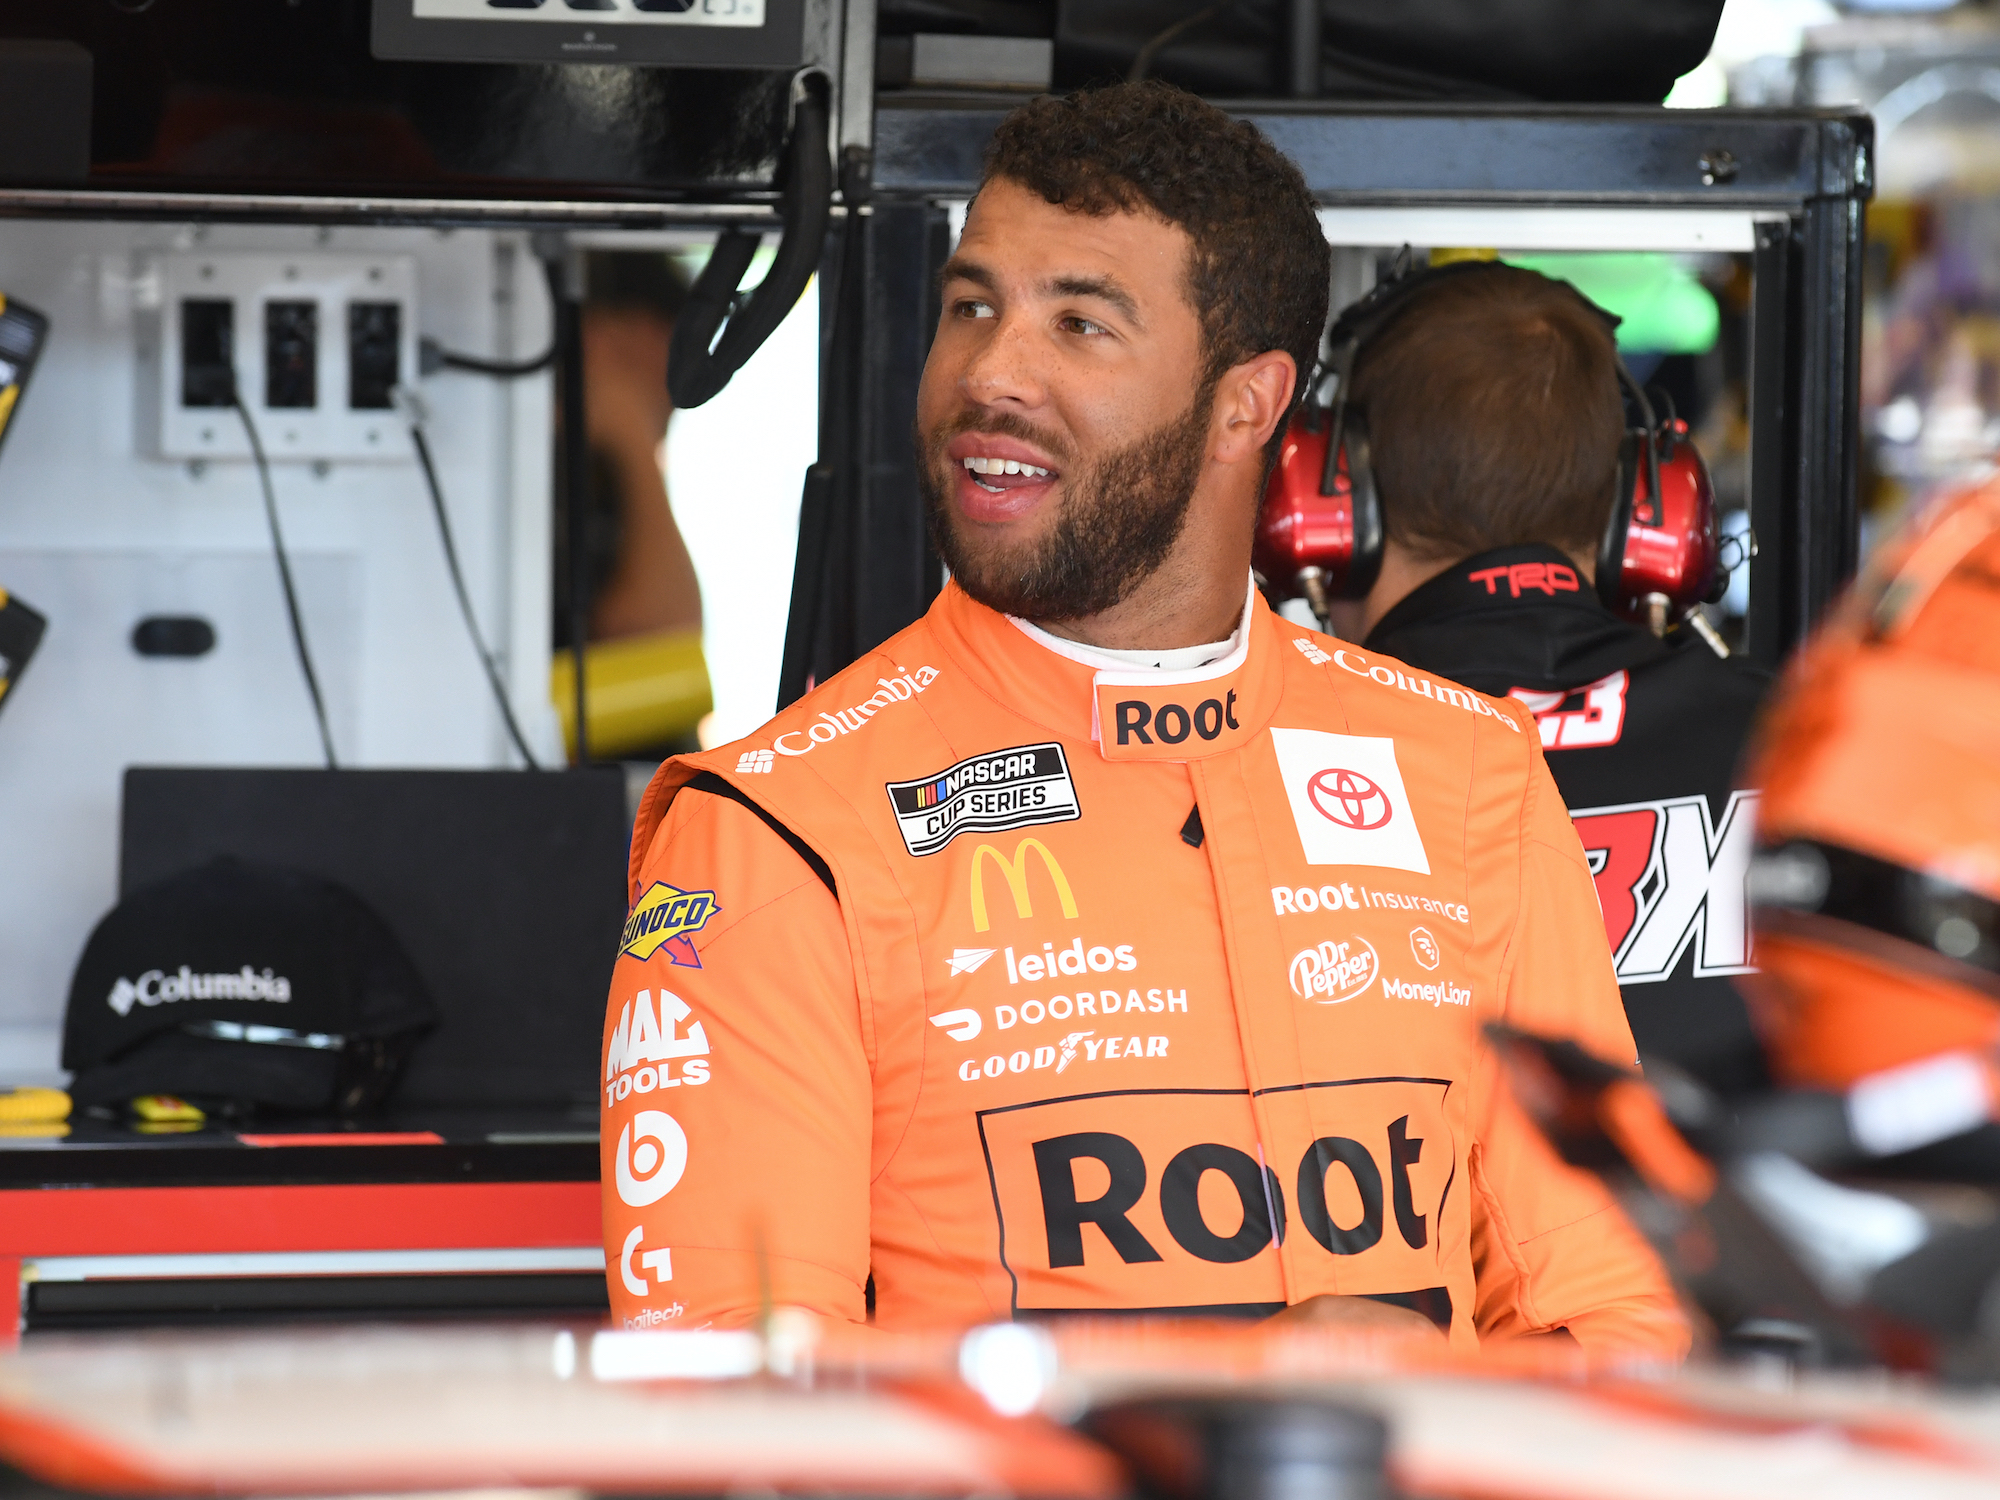 Bubba Wallace Goes Off on Team After Pit Crew Makes Another Costly Mistake: ‘Leave Me the F*** Alone. Don’t Talk to Me the Rest of the Race.’